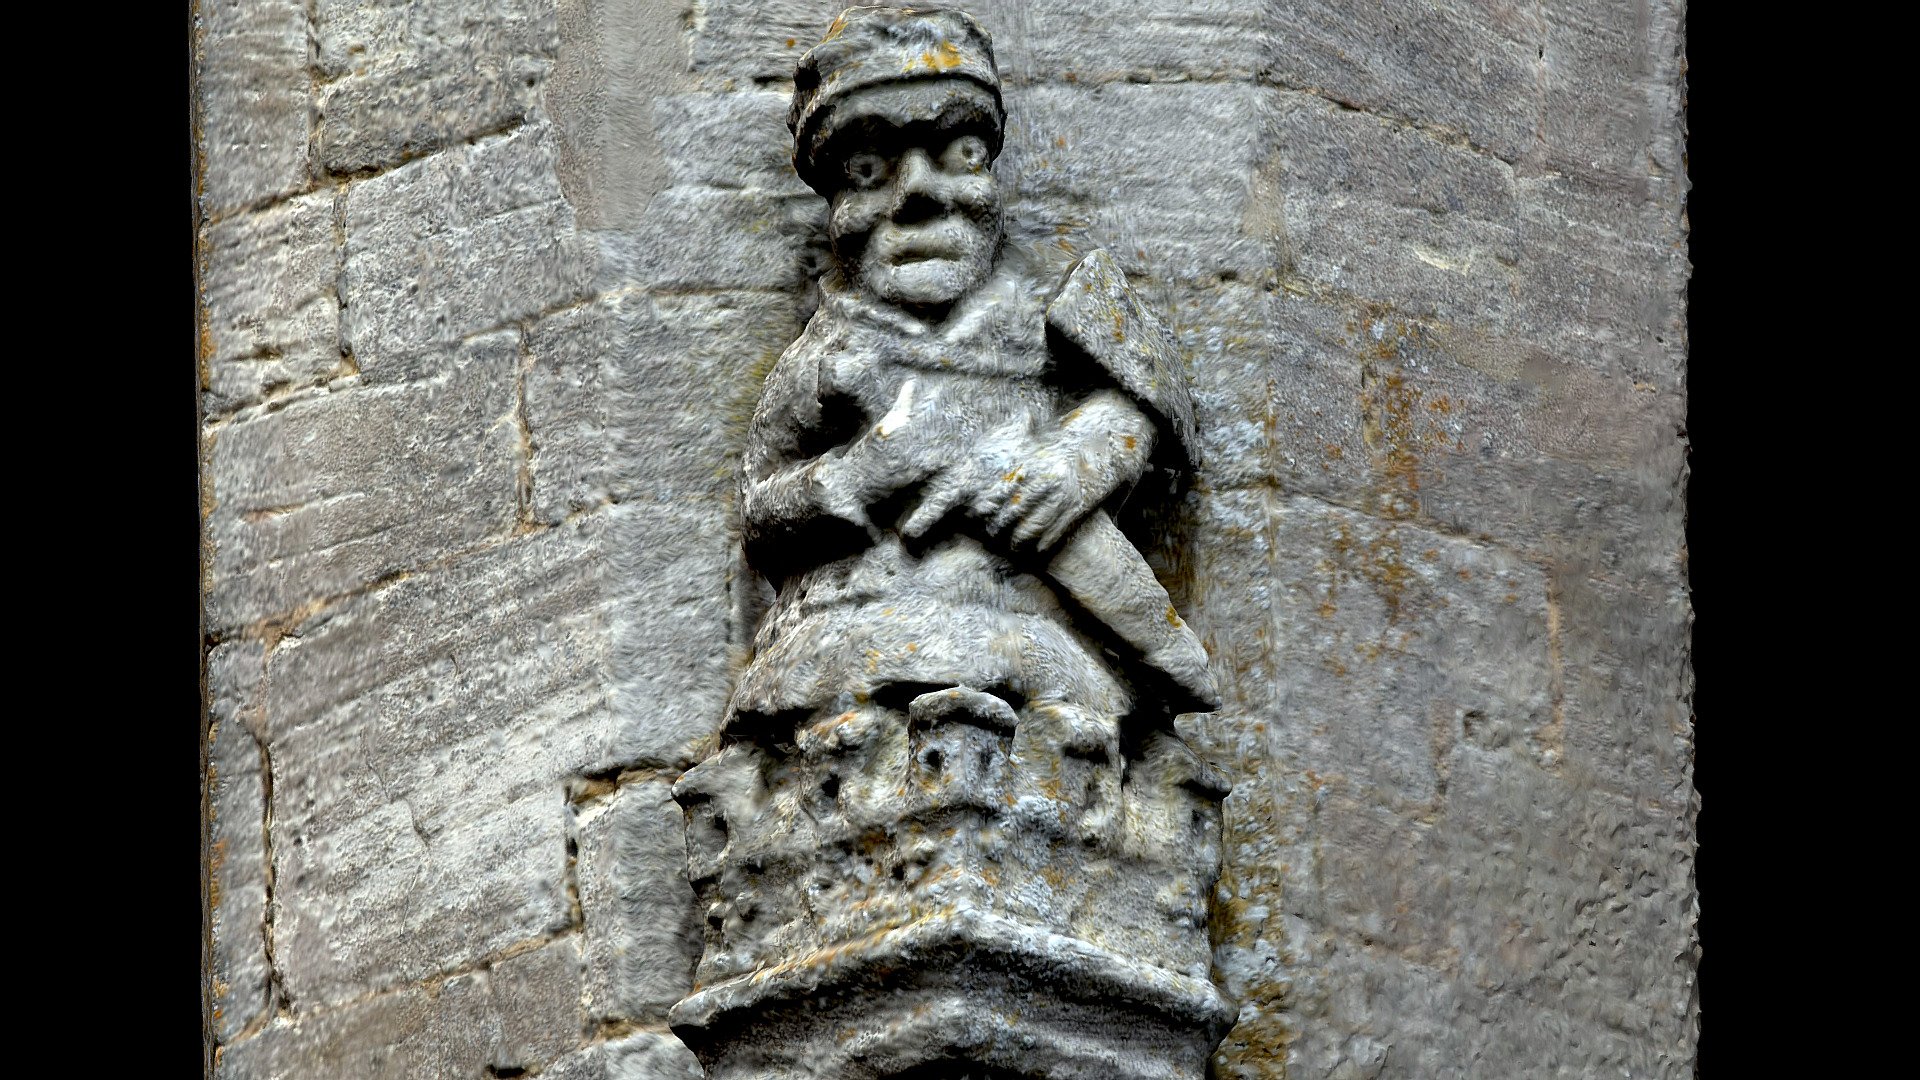 Grotesque knight, Fairford, Gloucestershire